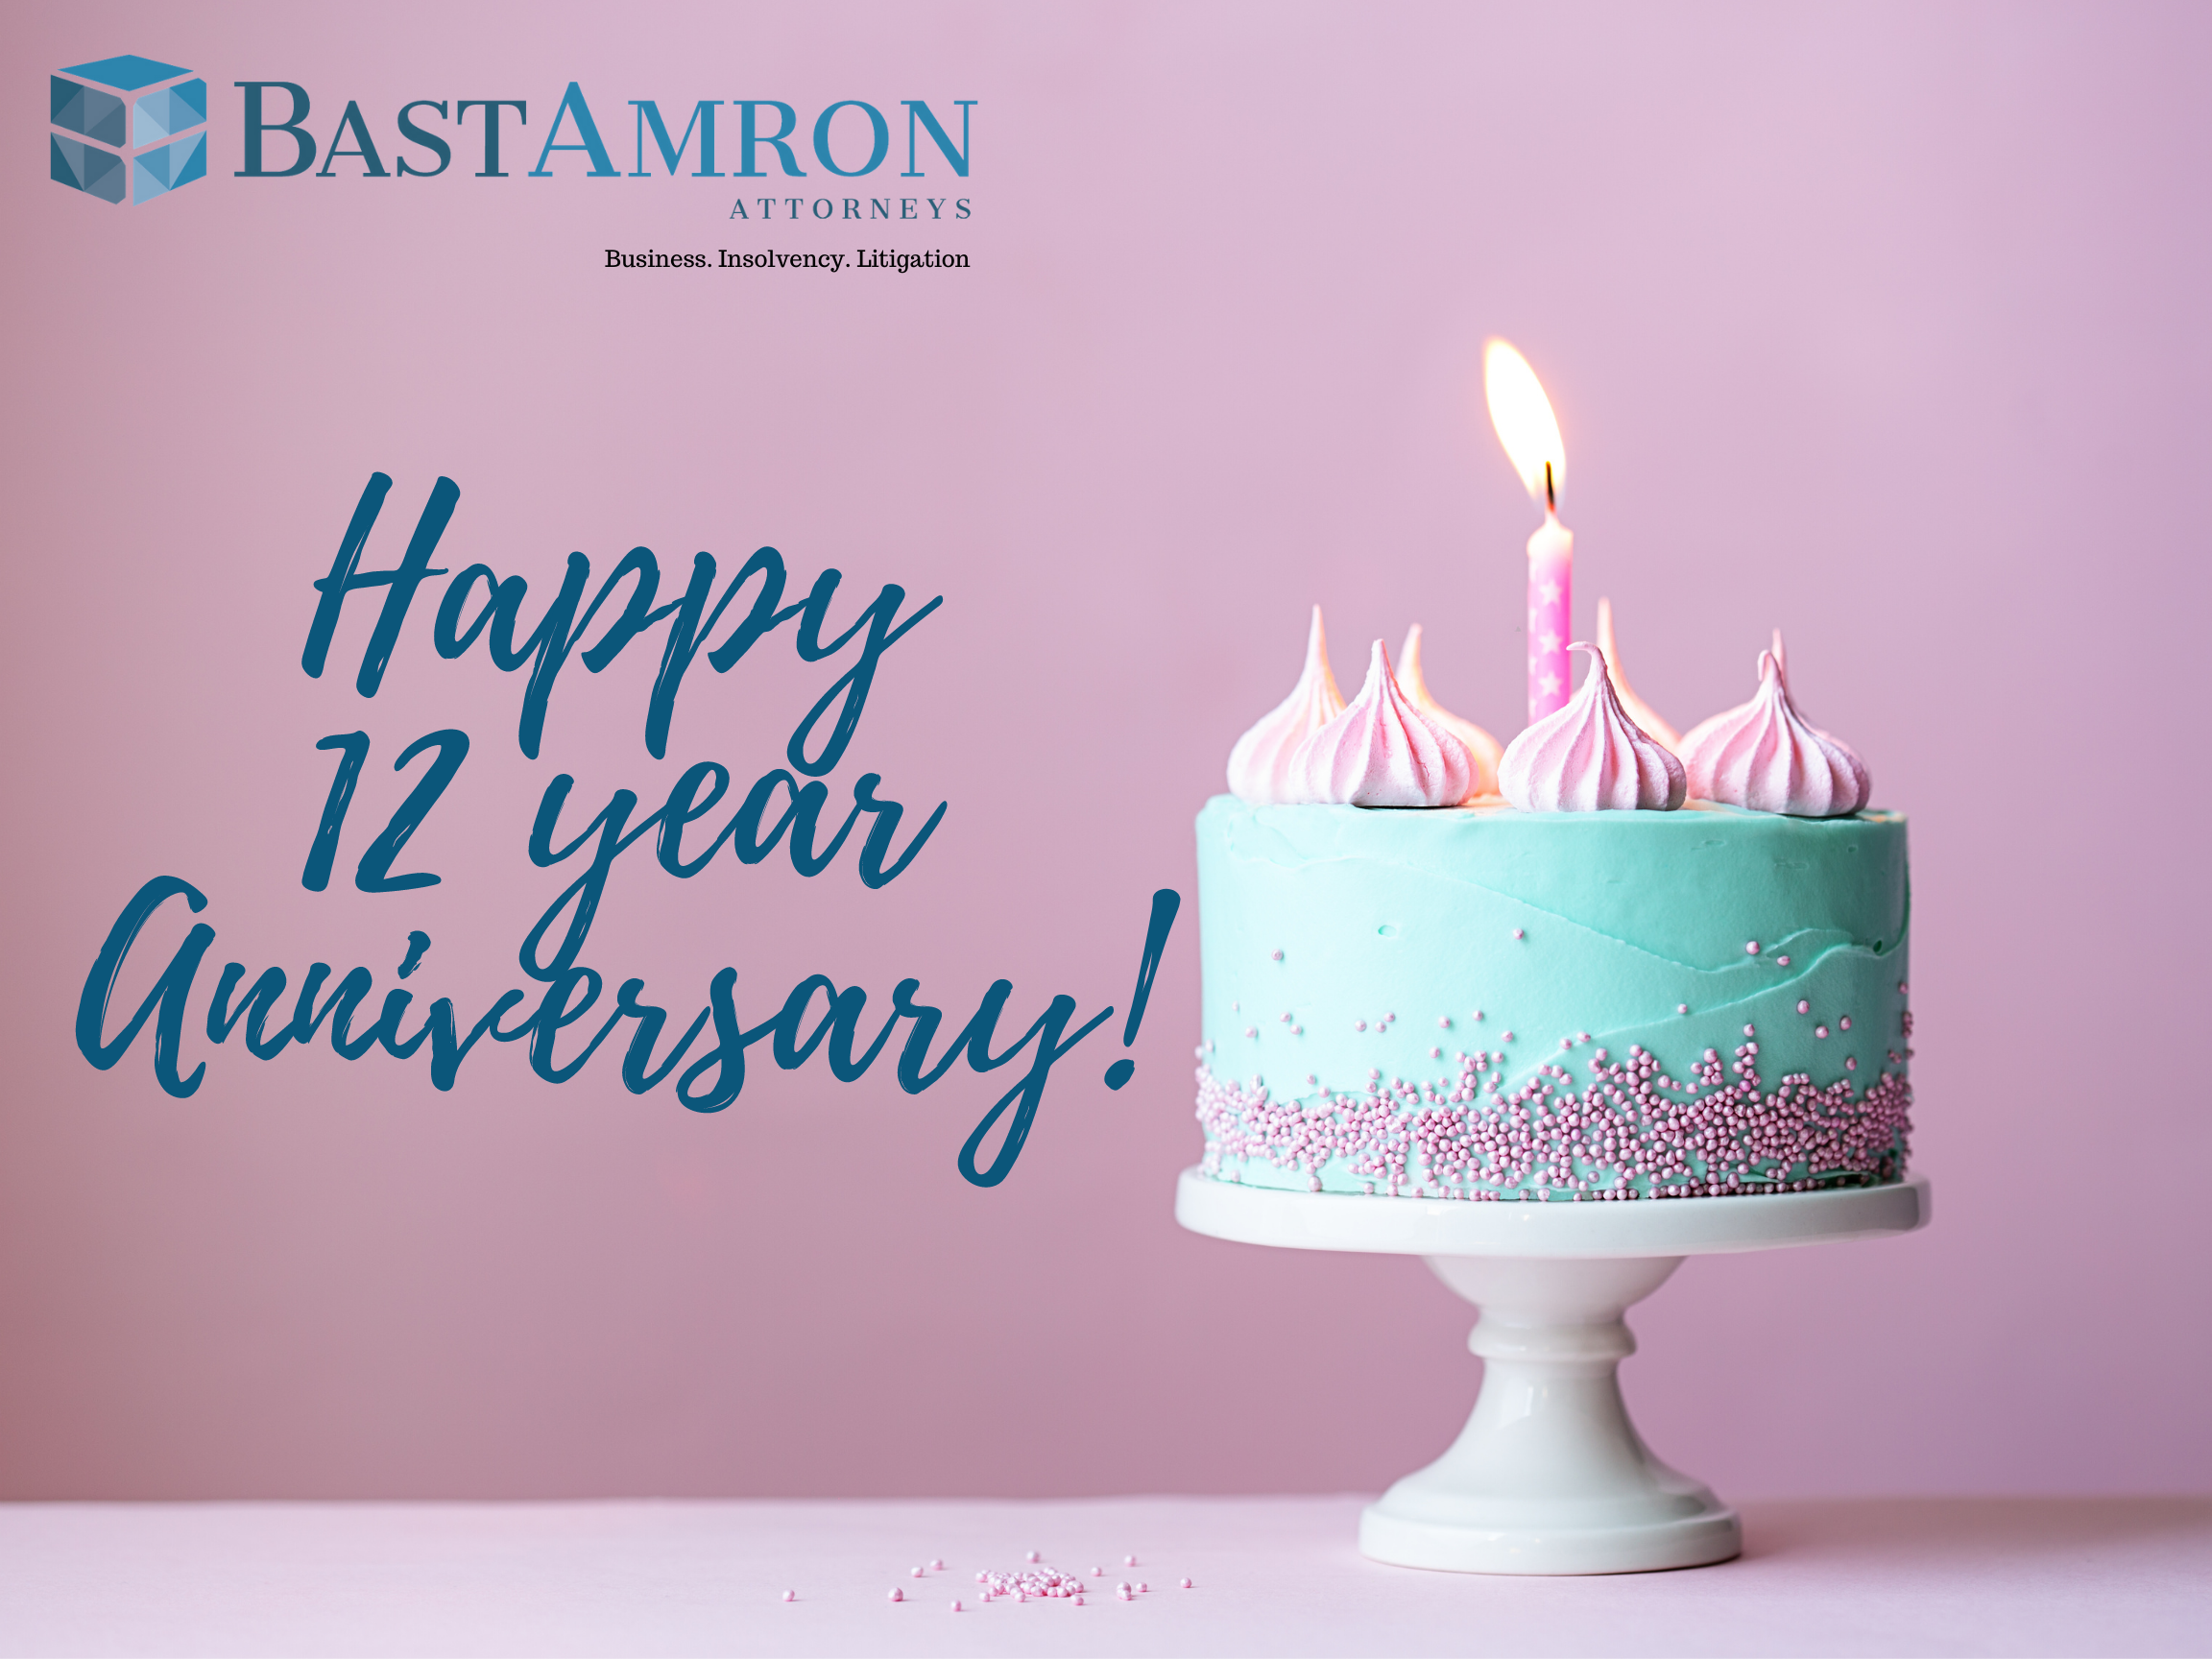 BAST AMRON – 12 YEARS– EVEN STRONGER